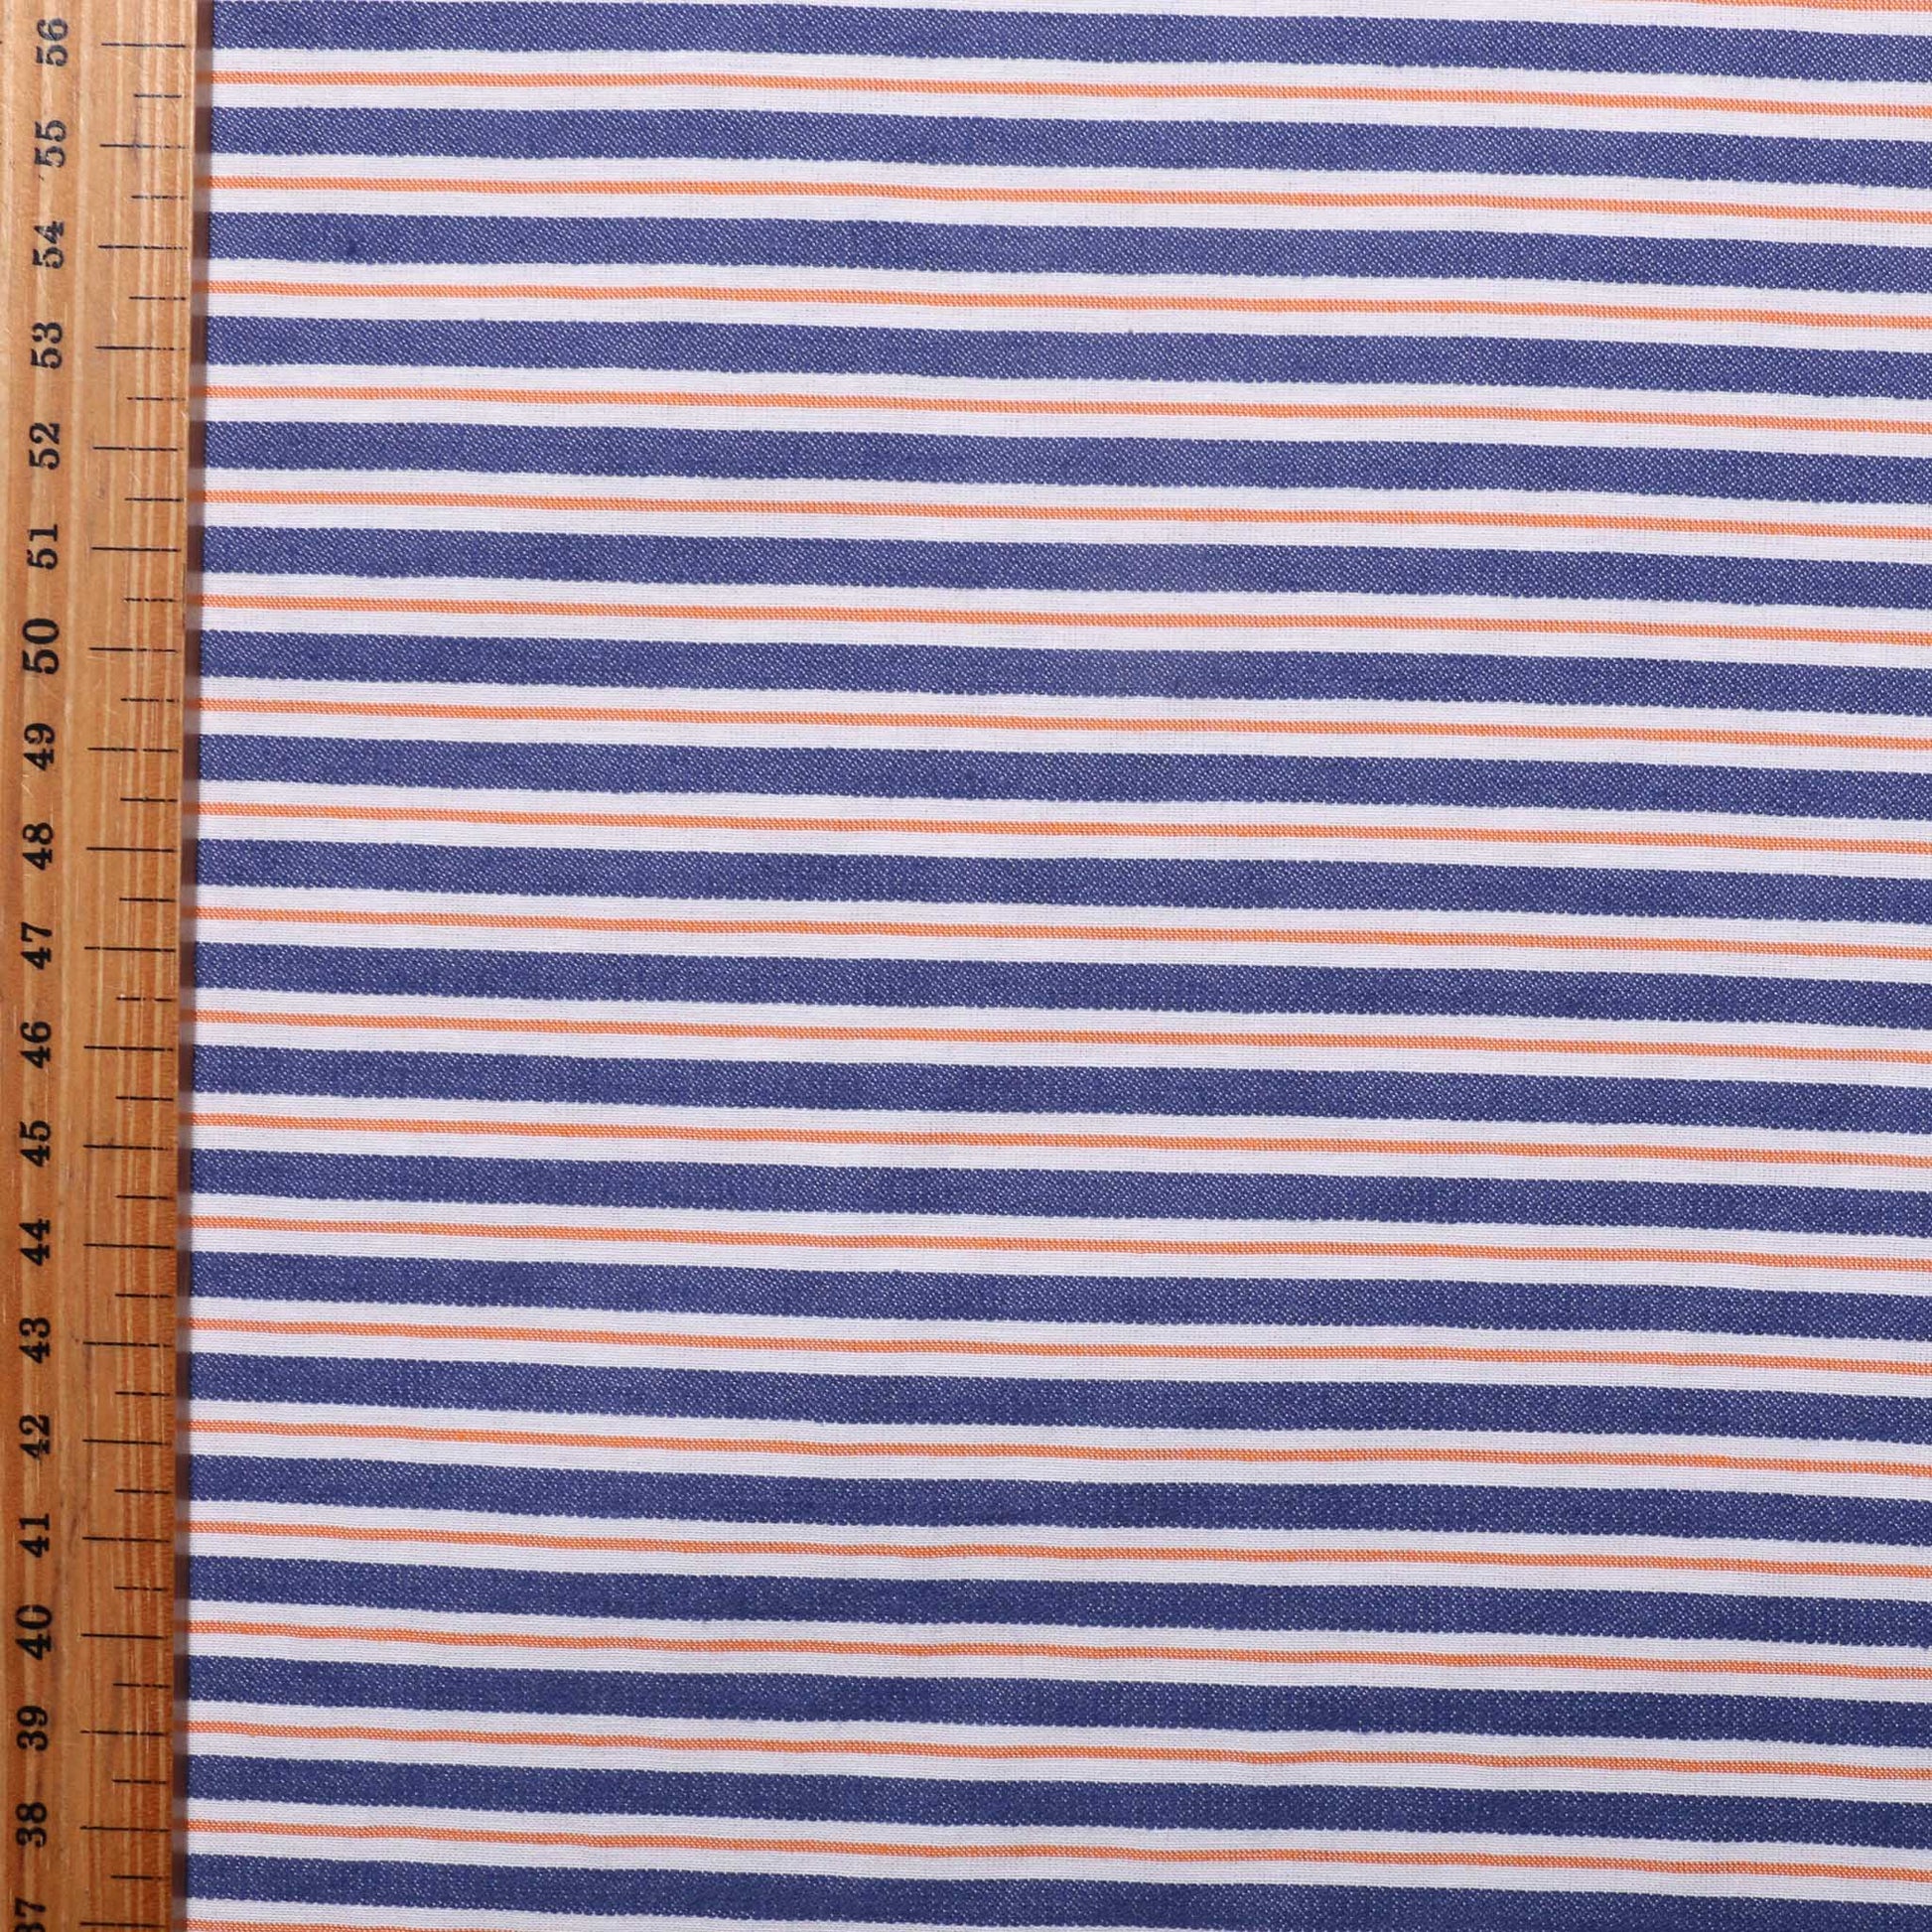 metre denim dressmaking fabric with yellow and white striped design